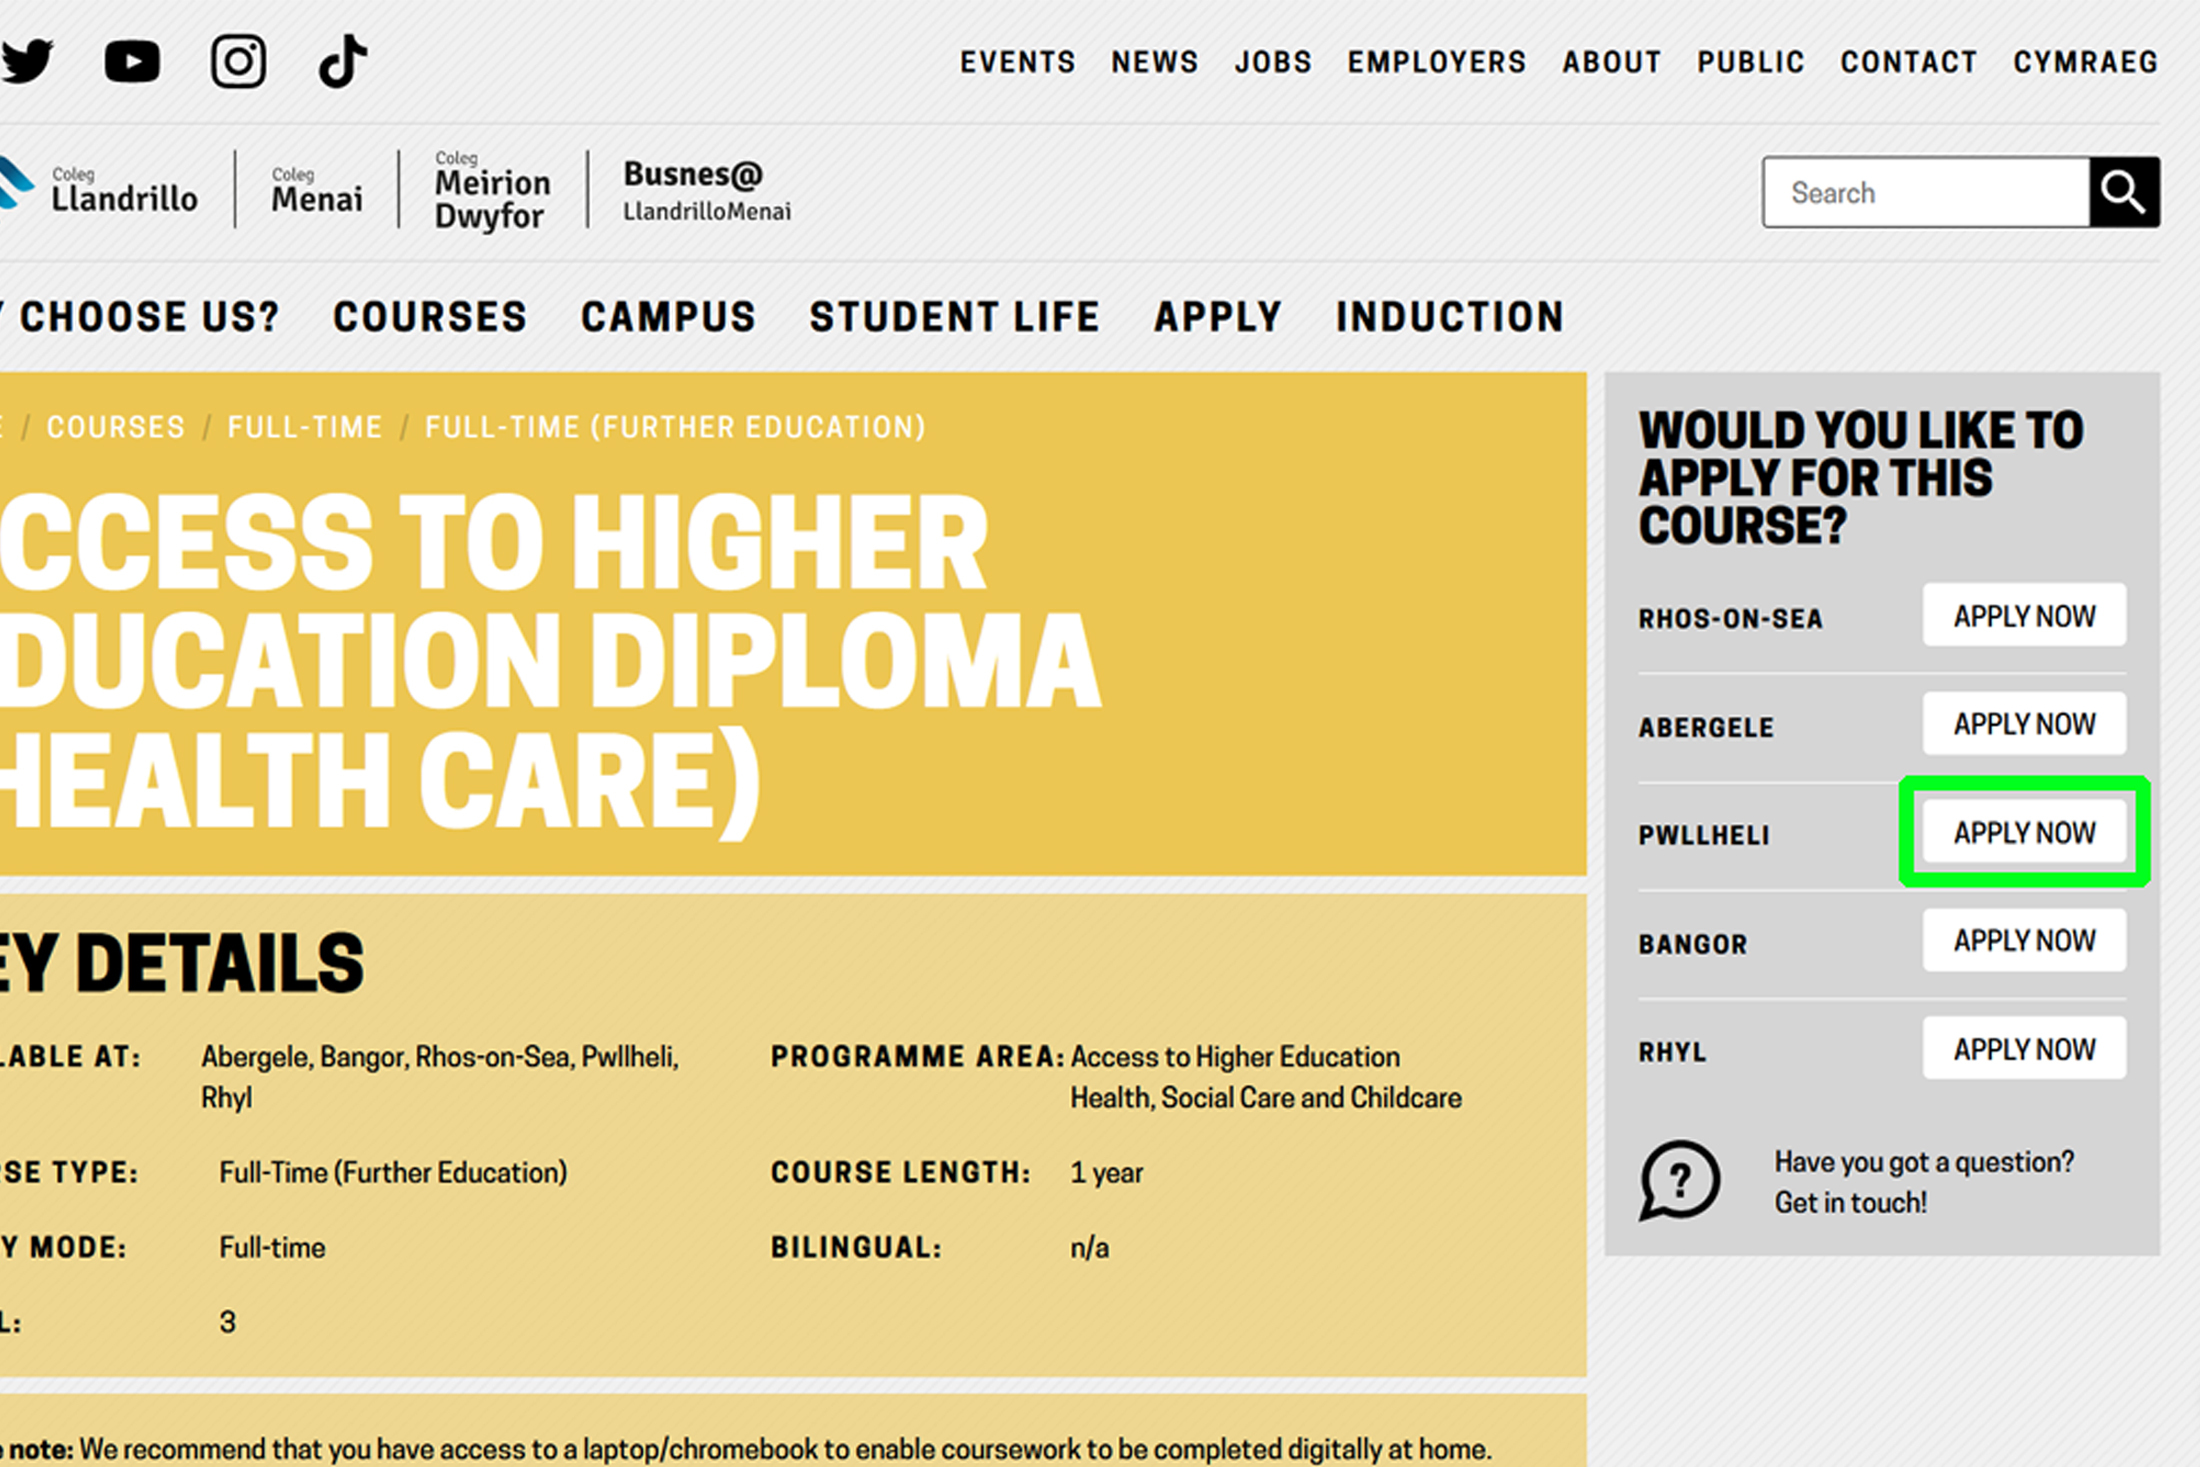 Step 2 - Select your campus from the course information page